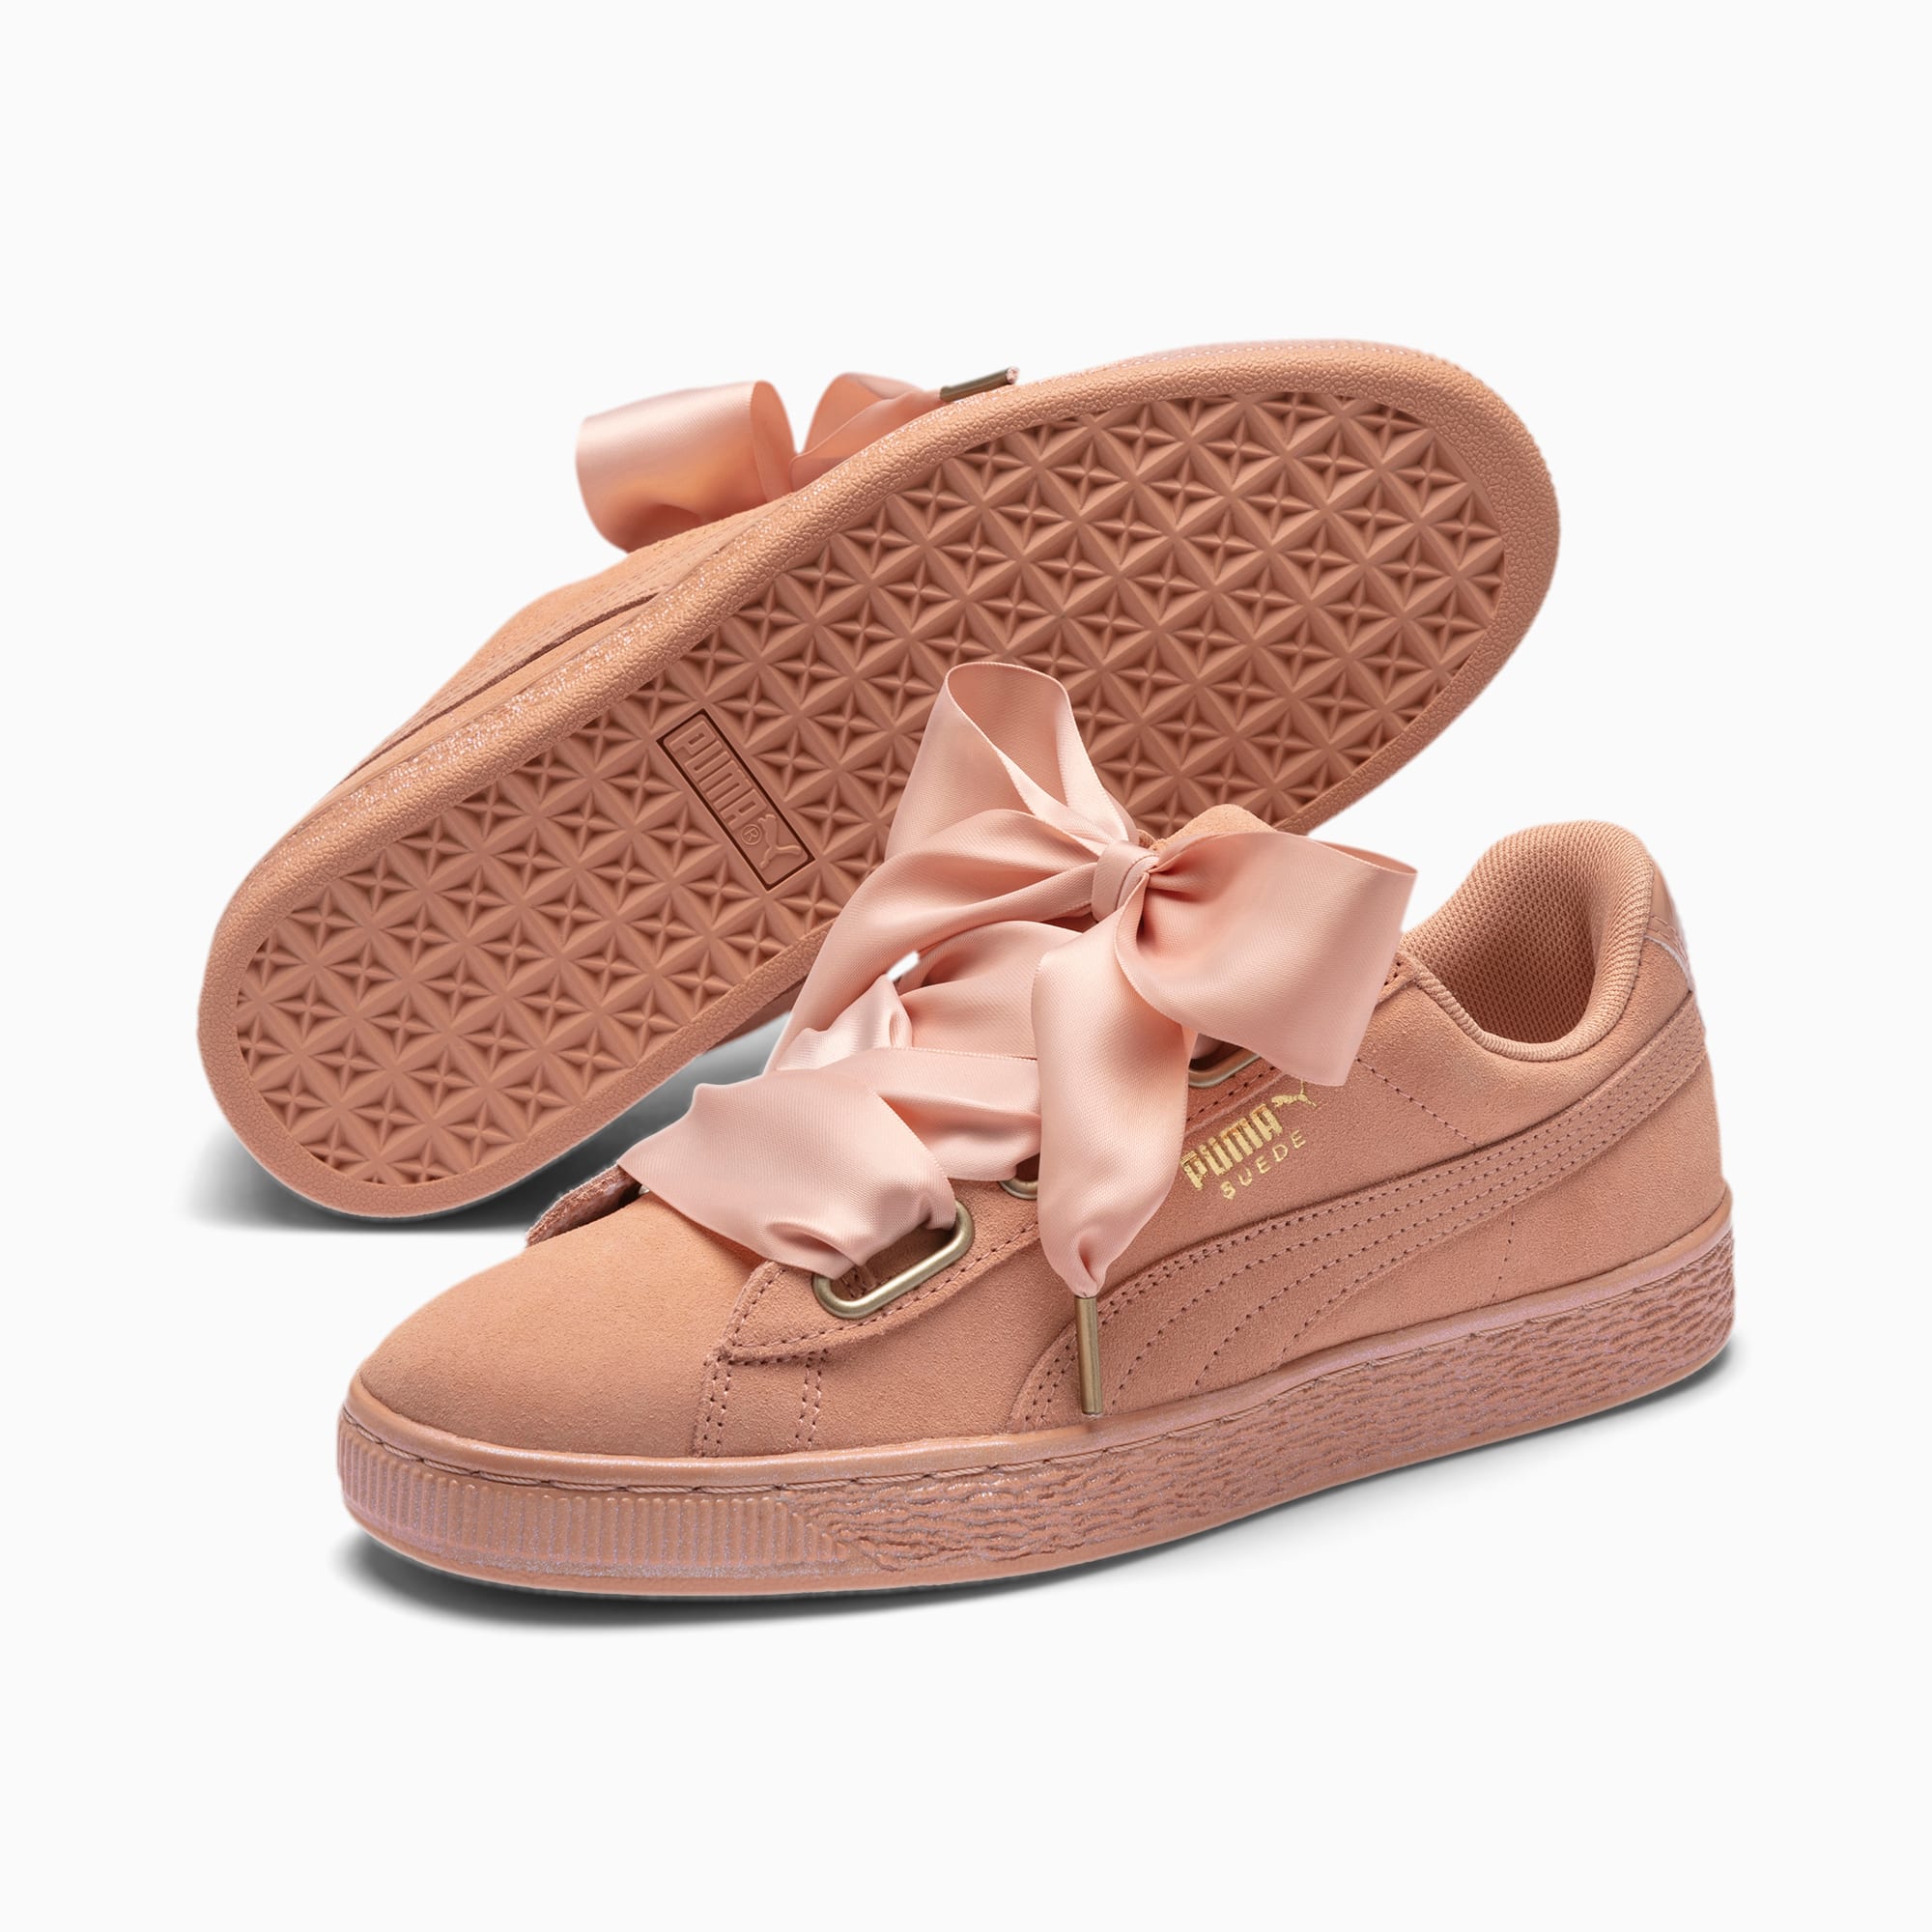 puma suede heart satin trainers